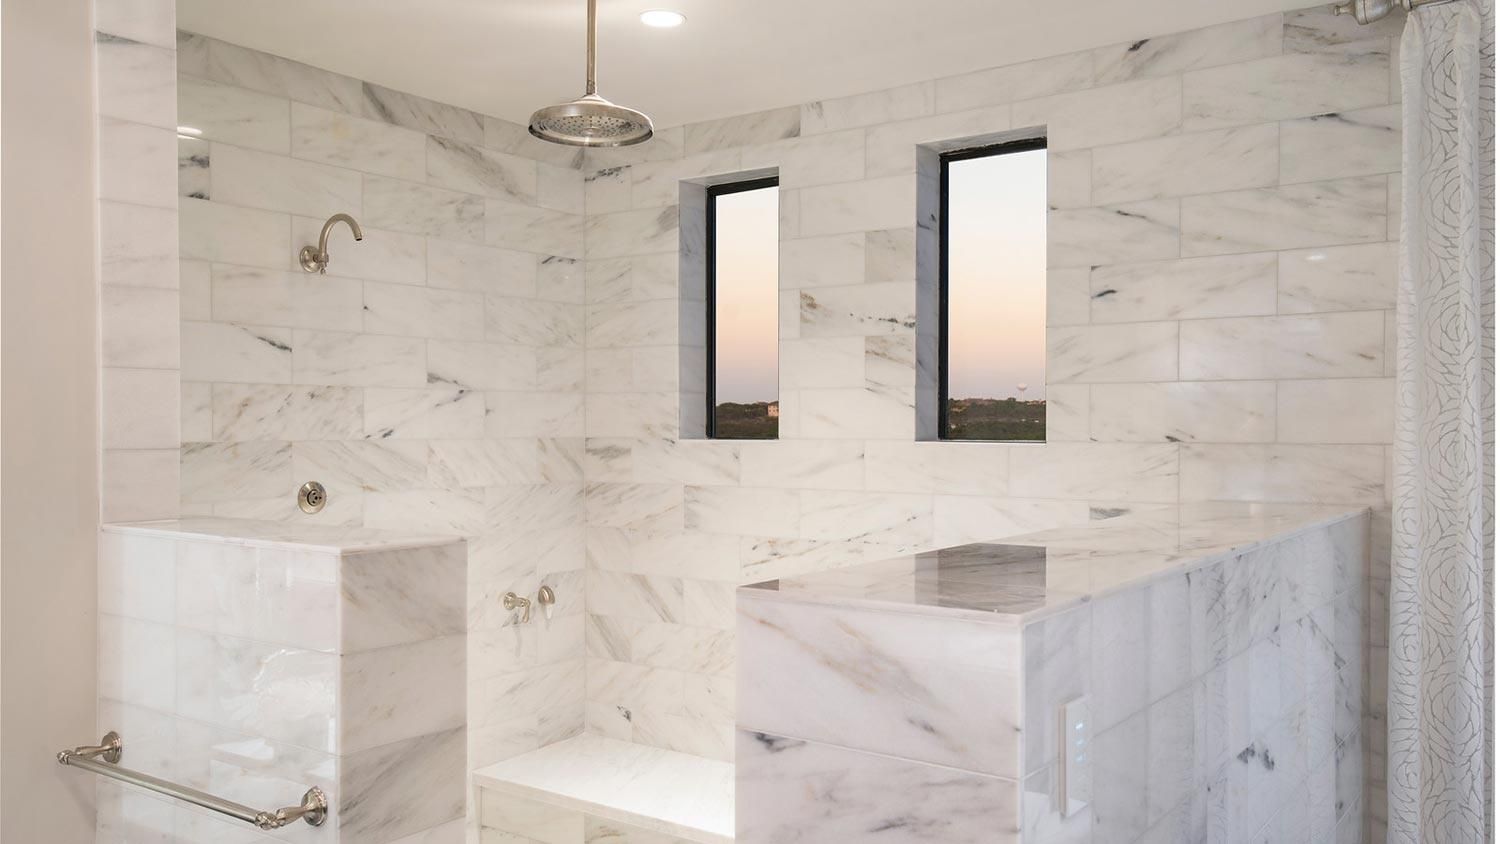 Ketra lighting in a white marbled bathroom